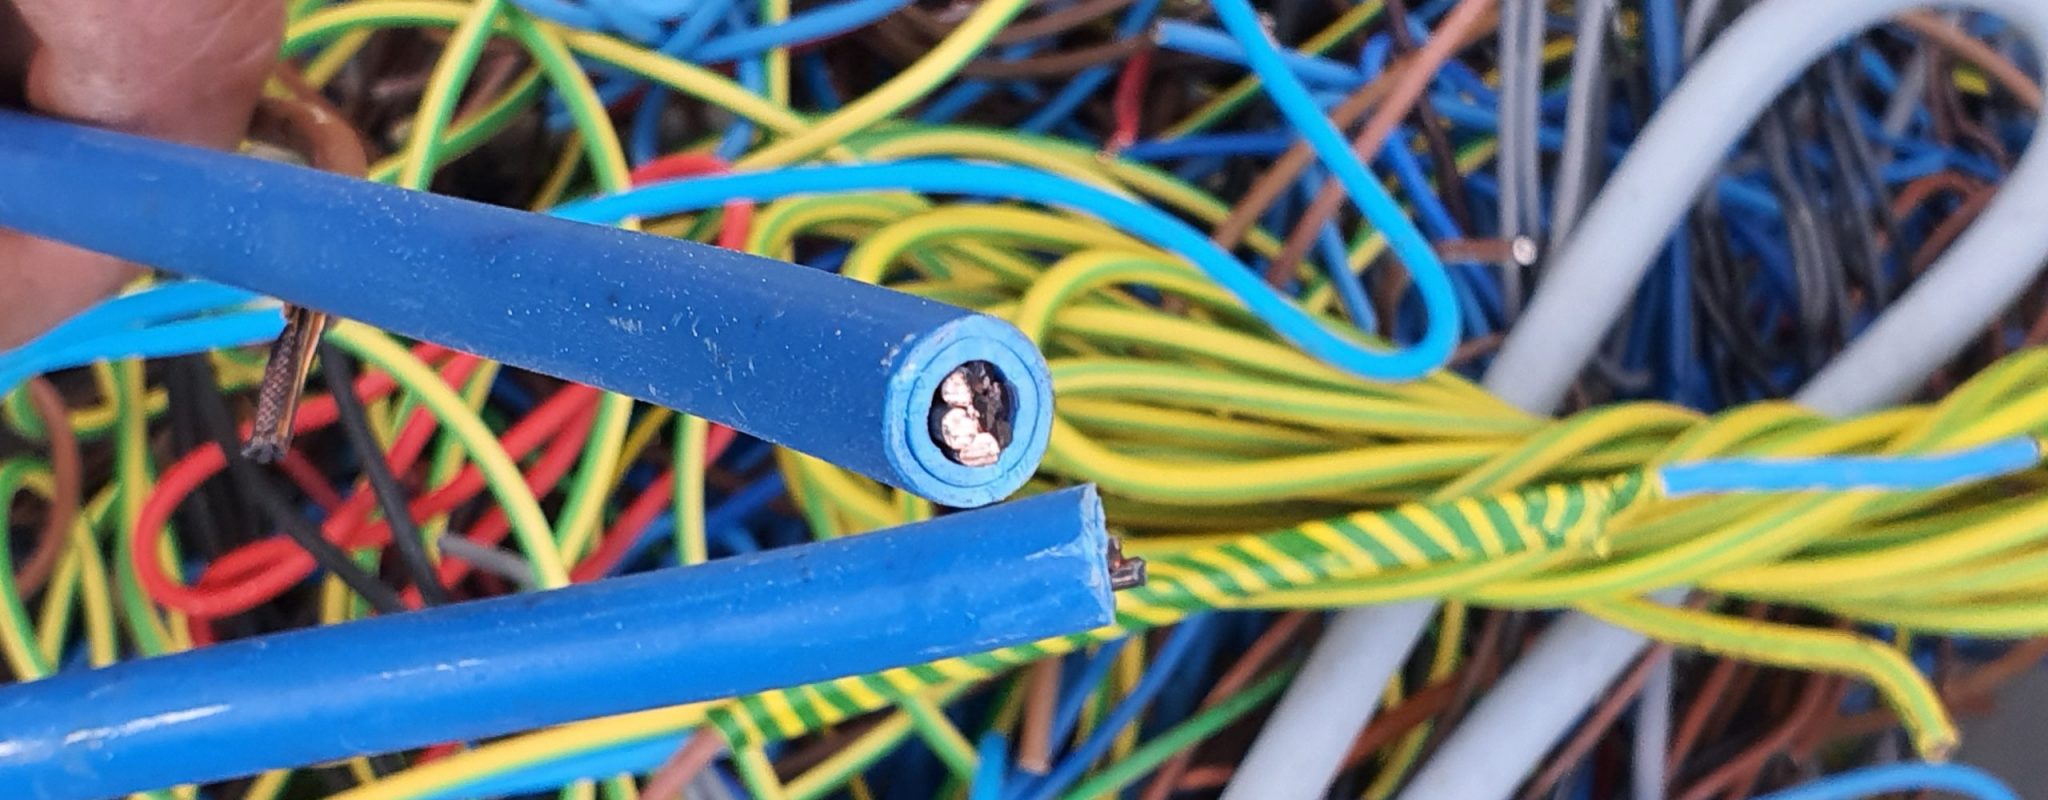 Importance of cable recycling